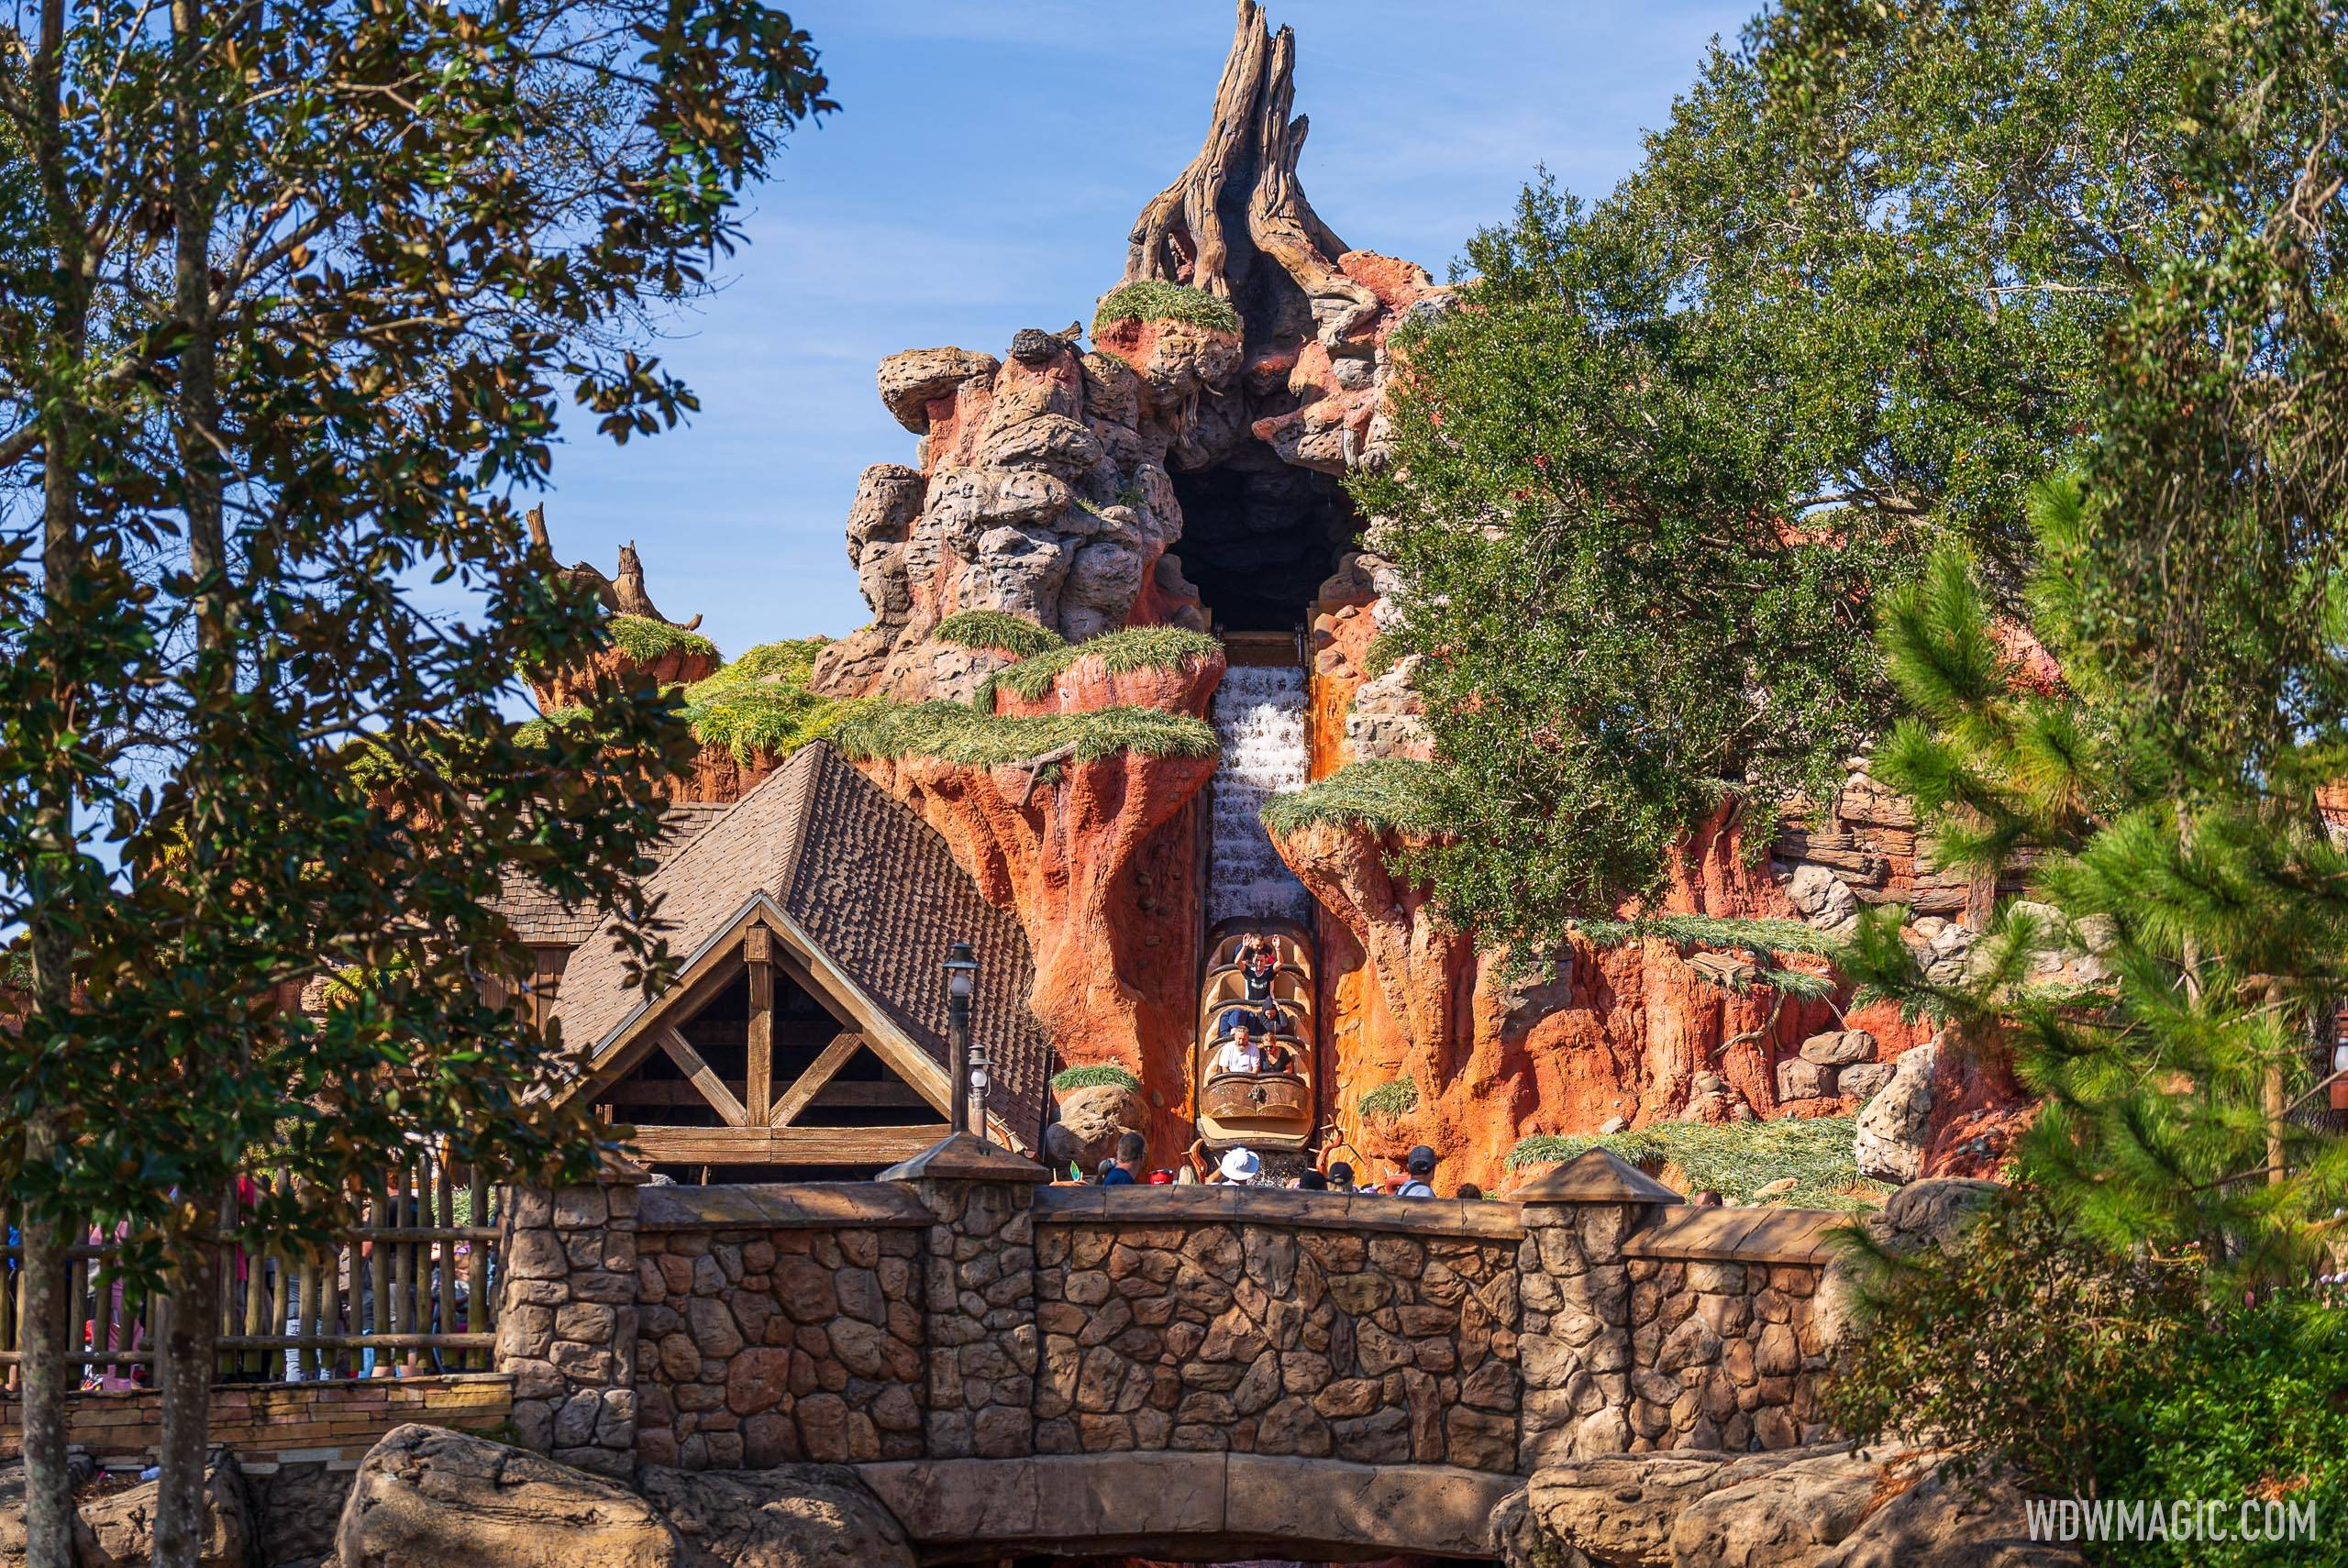 Last chance to ride Splash Mountain as the classic Magic Kingdom attraction permanently closes this weekend